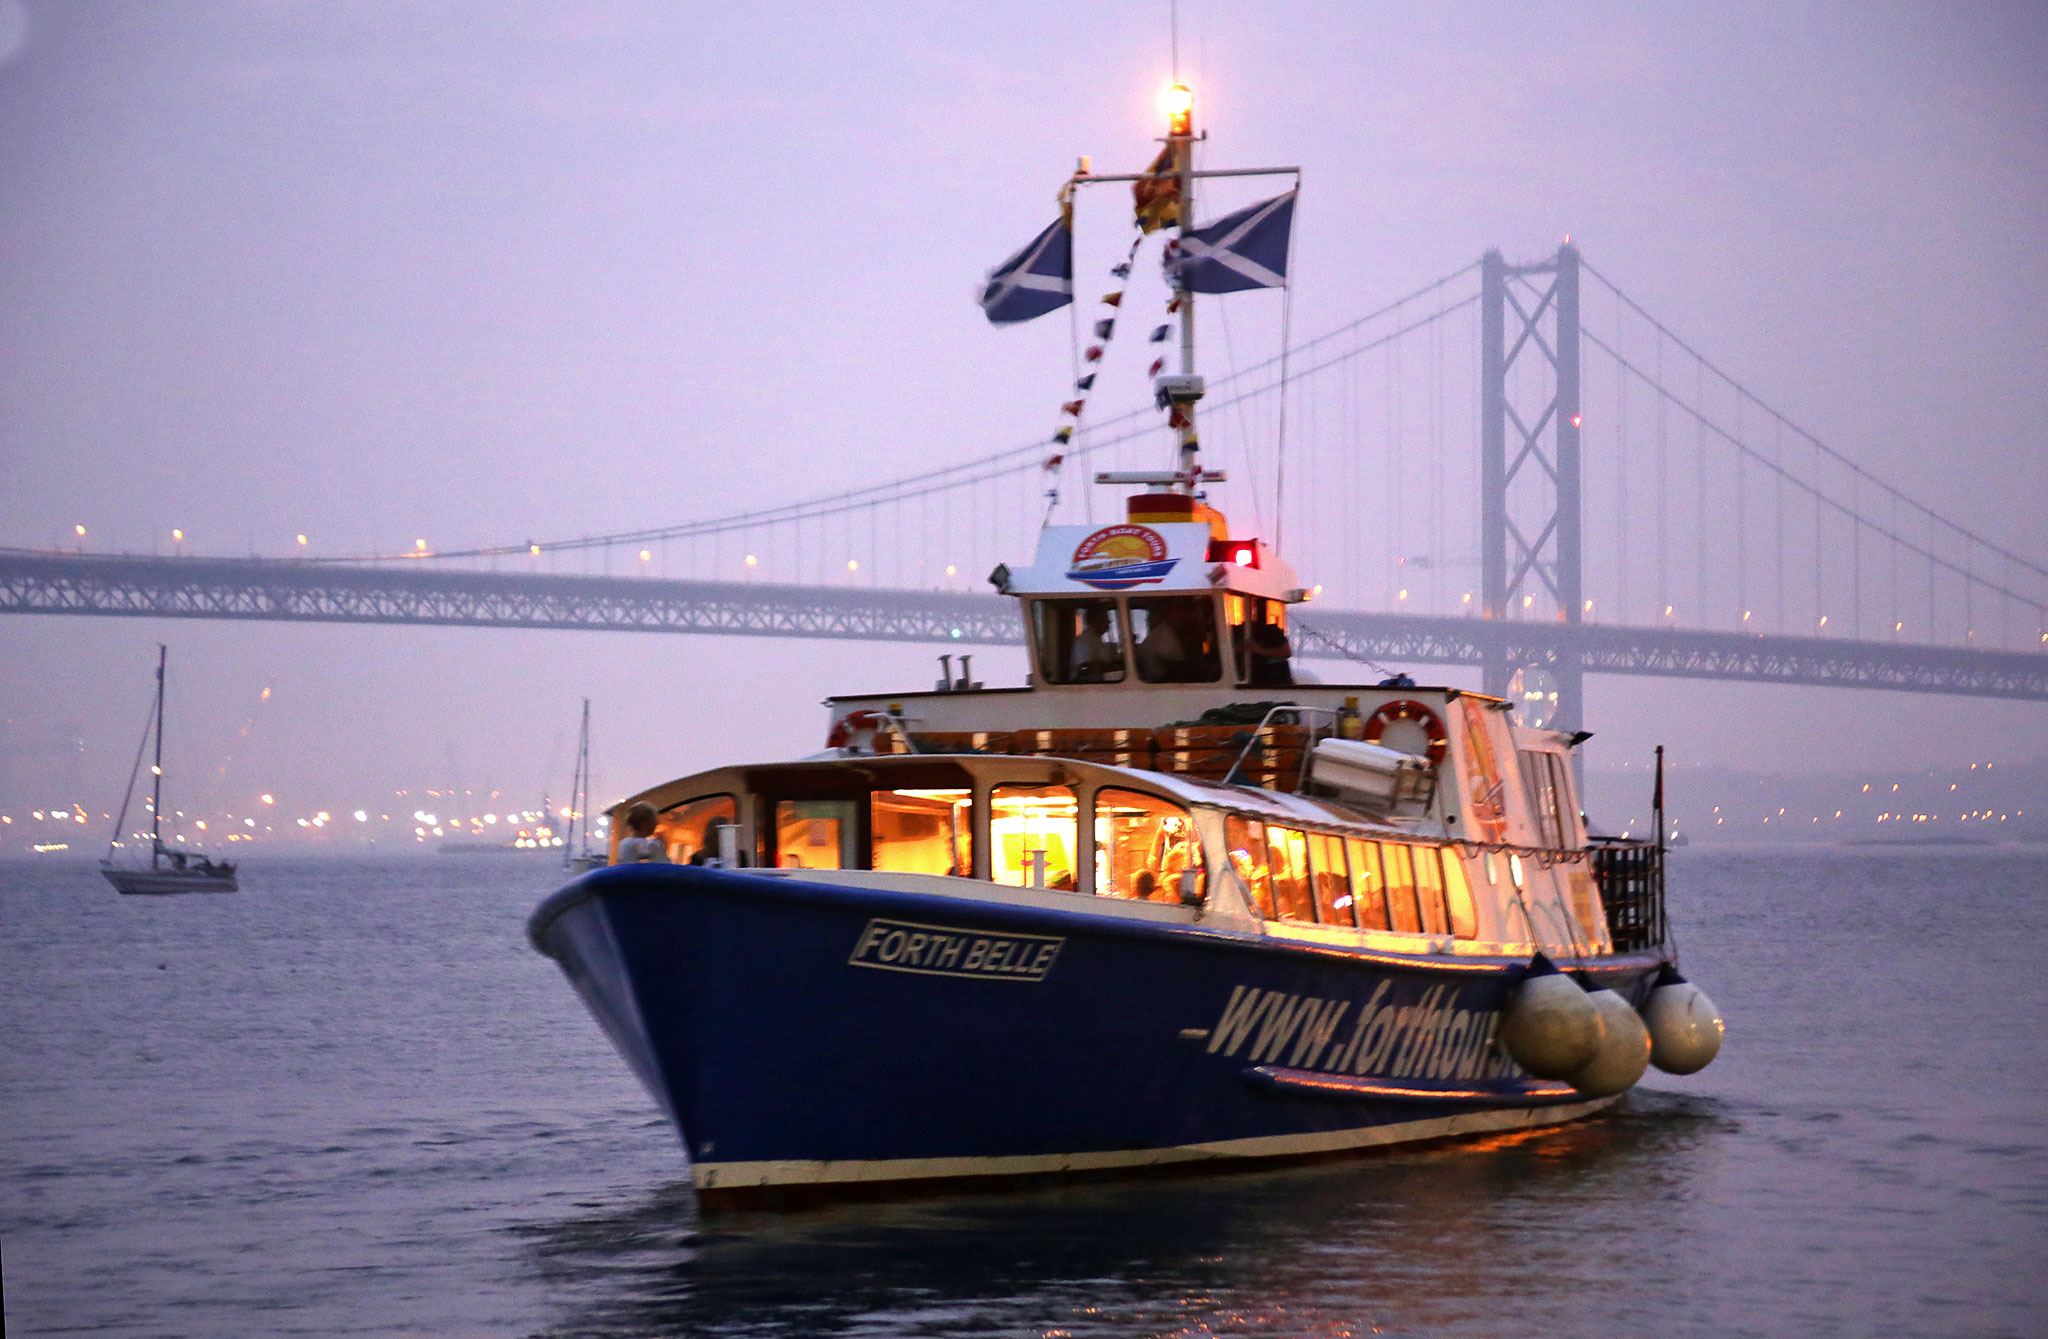 Forth Road Bridge 50th Anniversary Celebrations, September 2014  -  The cruise boat, 'Forth Belle' and its passengers departs from Hawes Pier, South Queensferry on a cruise to view the Forth Road Bridge Firework Display